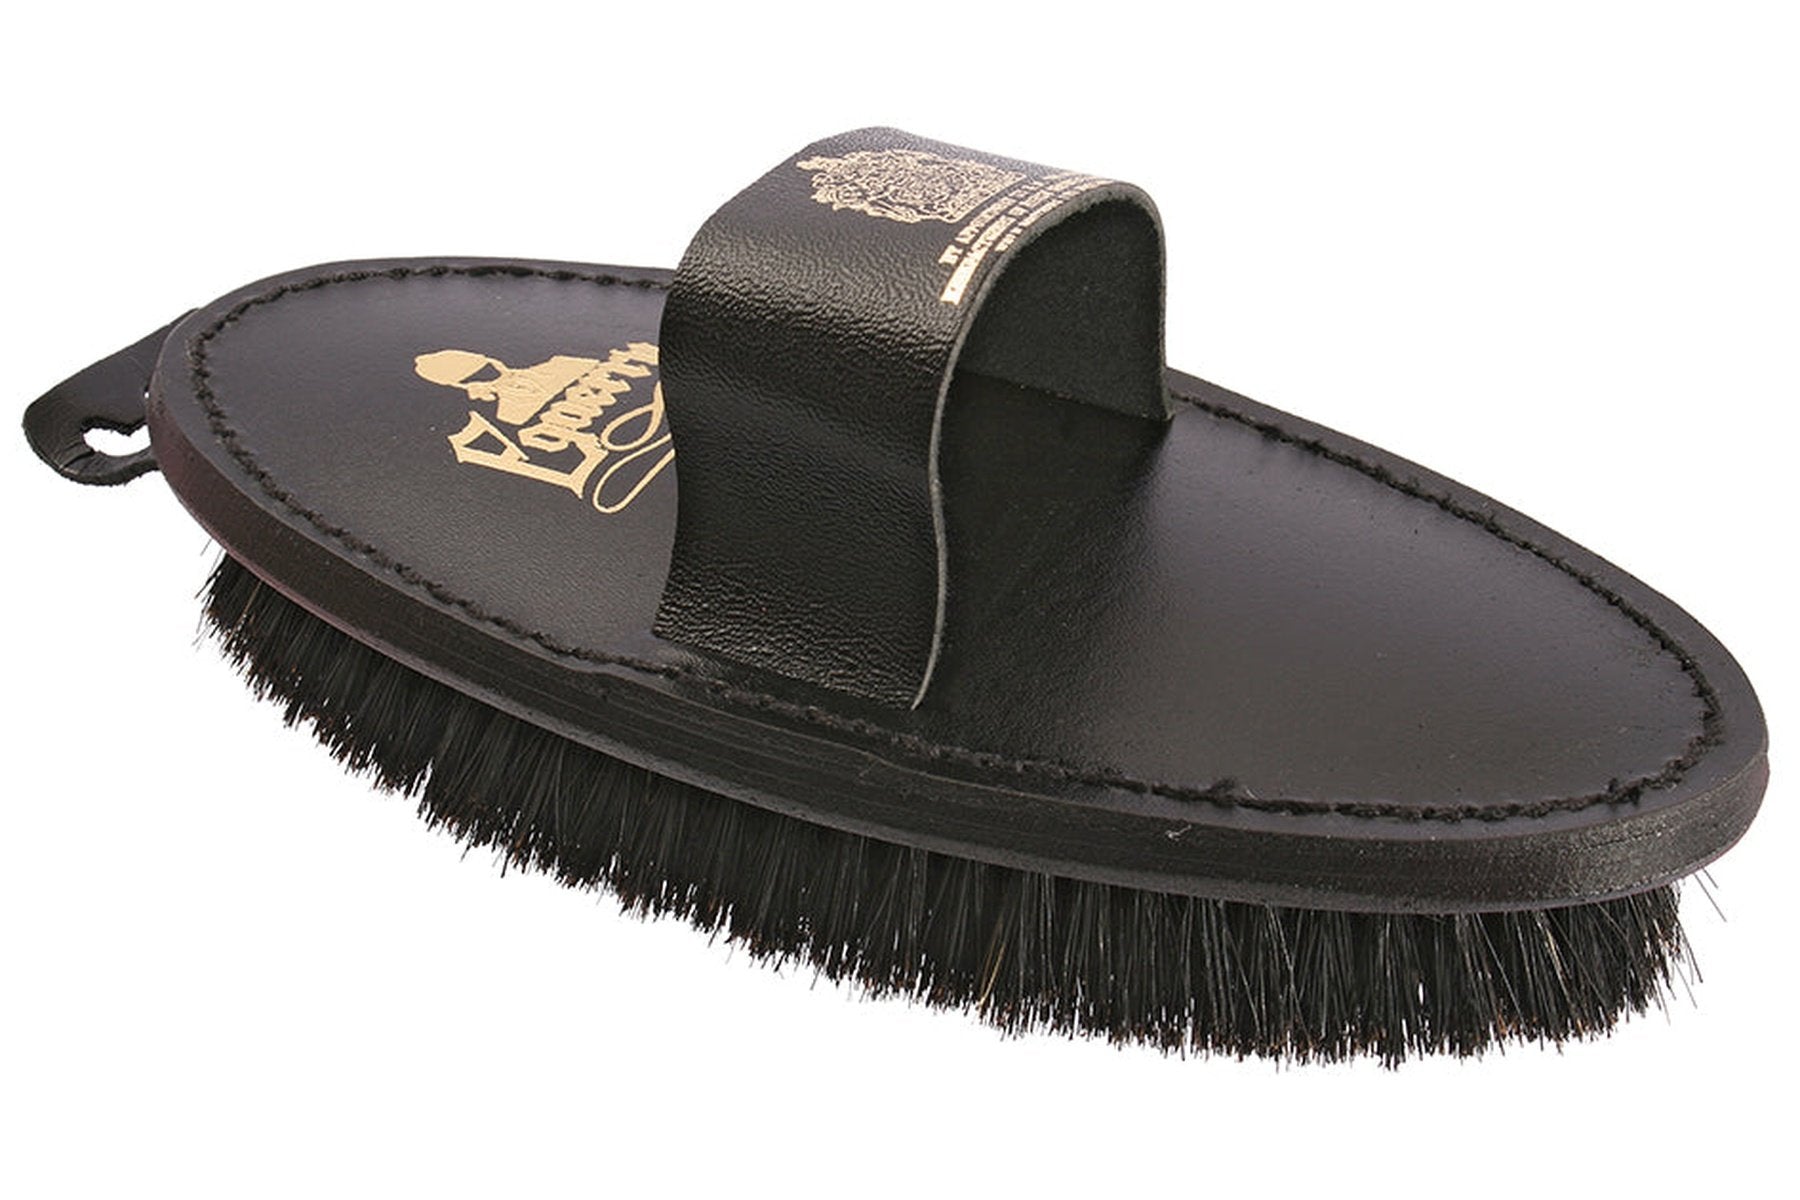 Equerry Leather Backed Body Brush